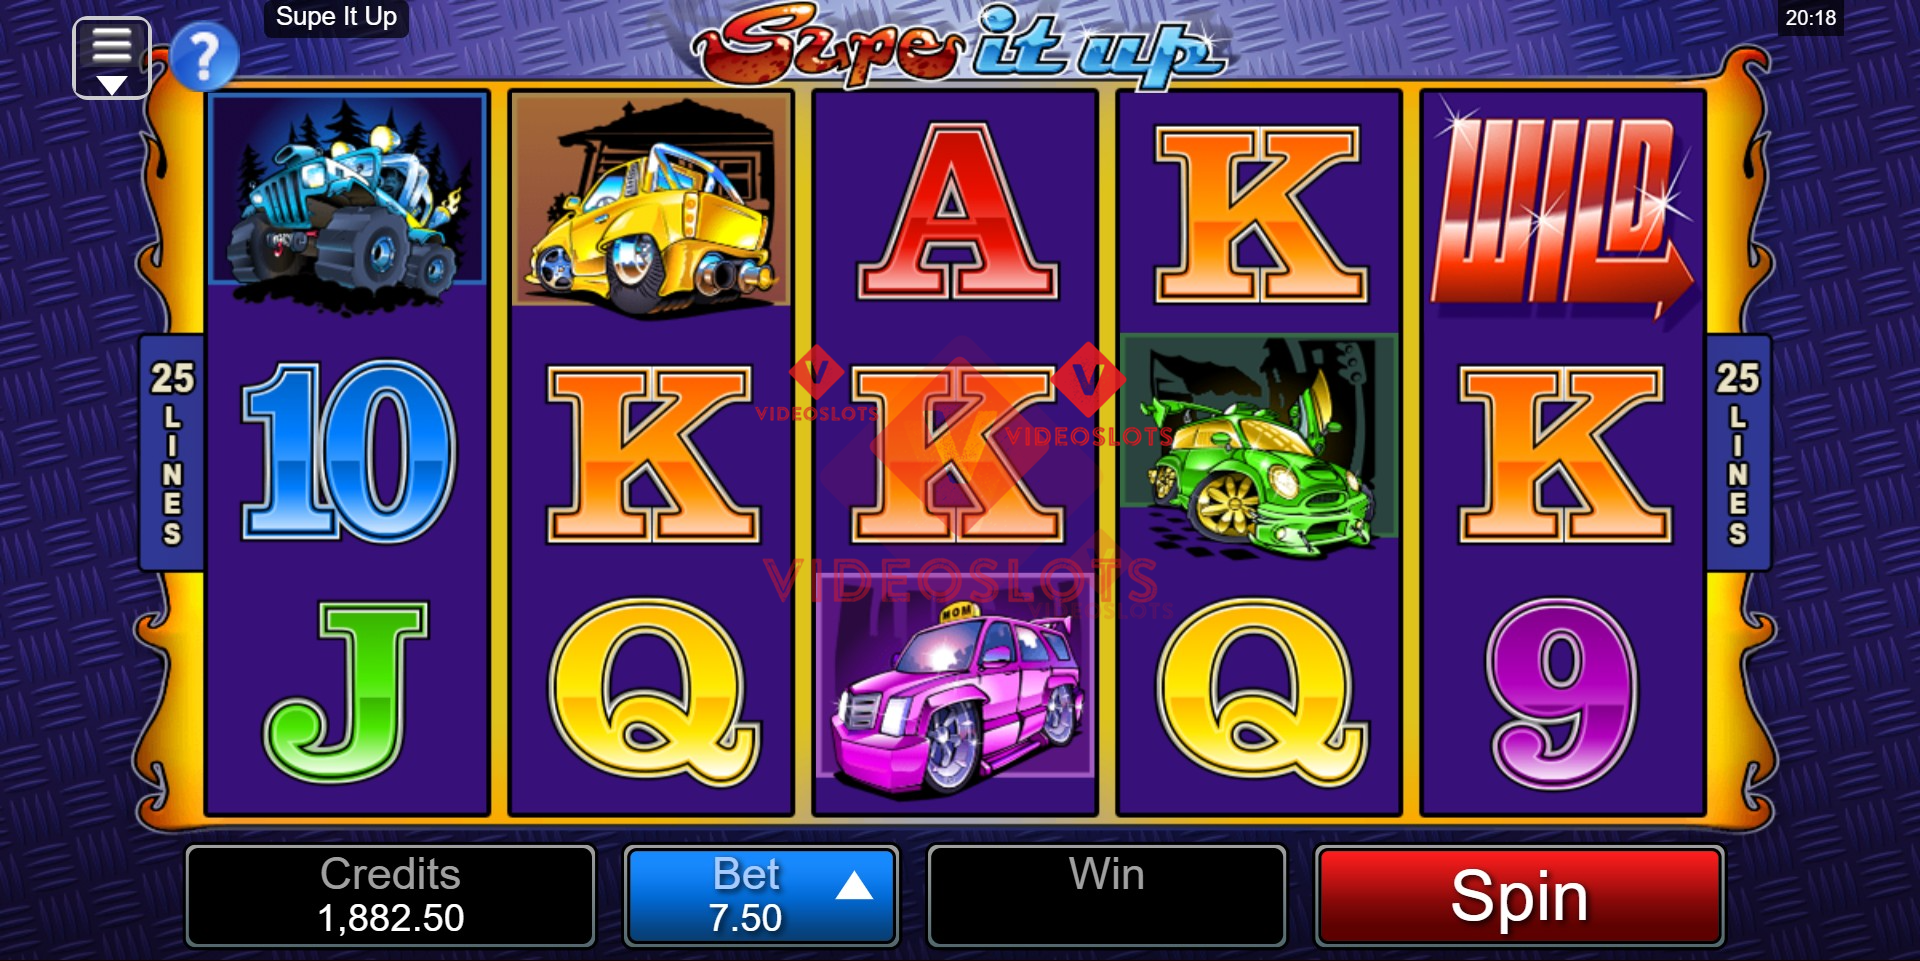 Base Game for Supe It Up slot for Microgaming